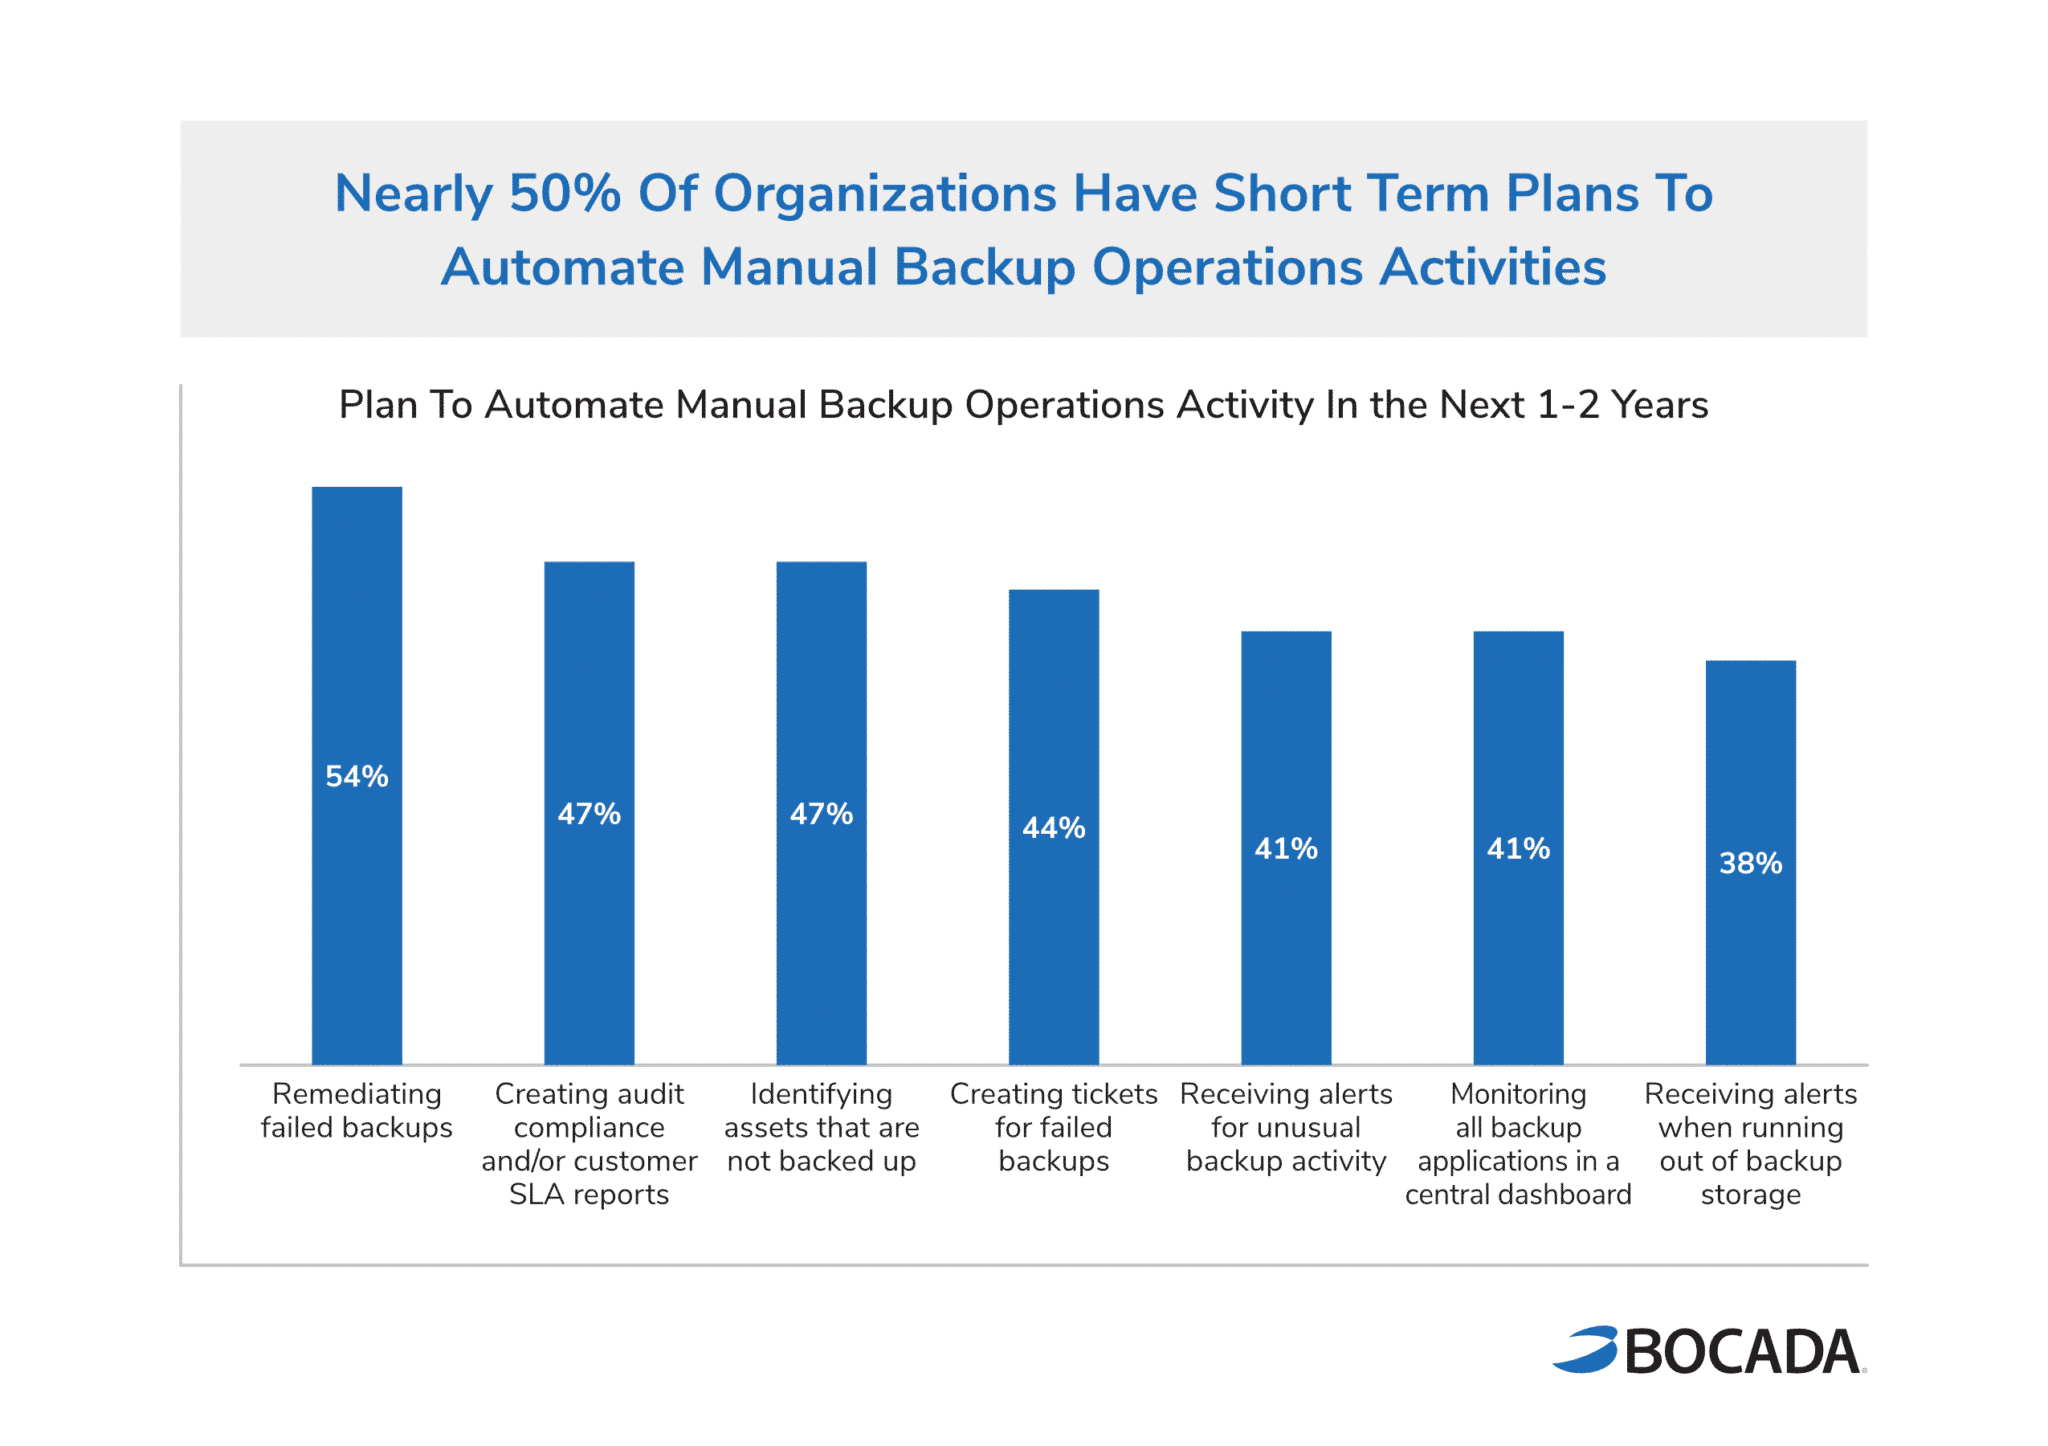 Backup Monitoring Trends Report - Plans For Future Automation